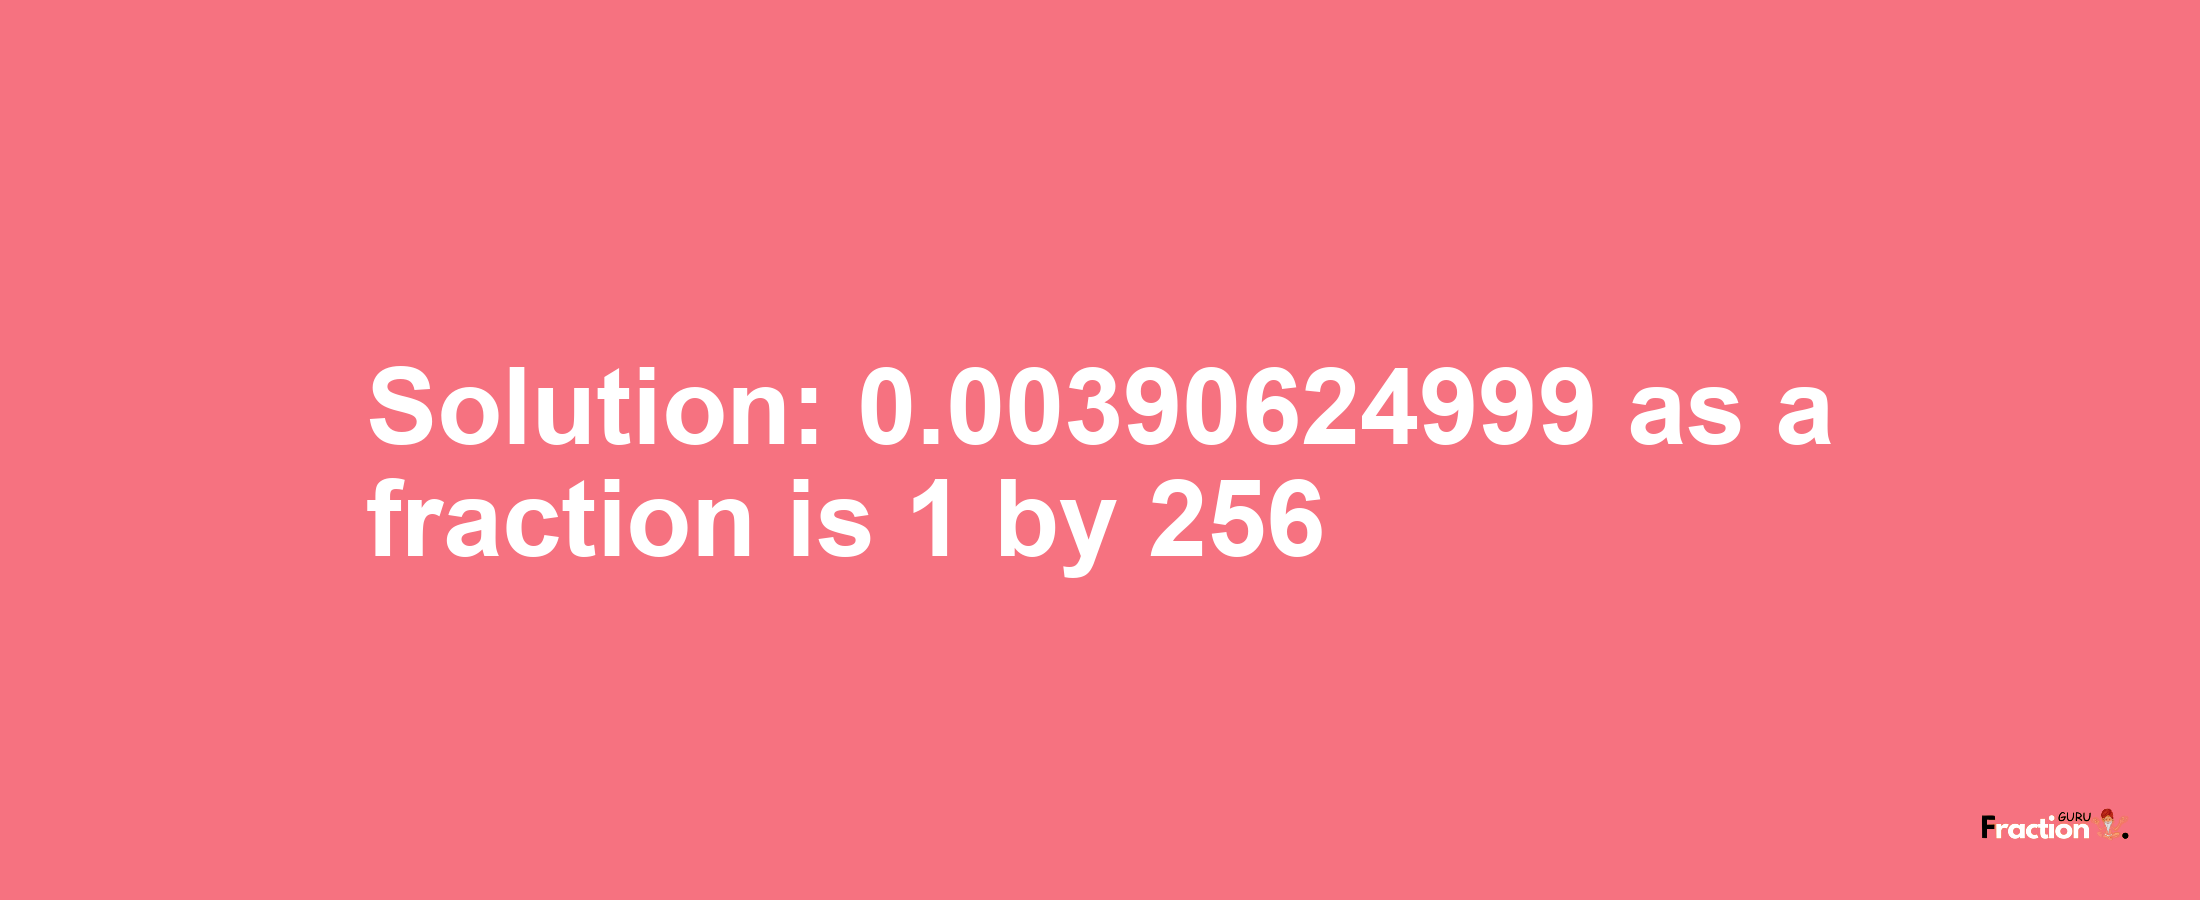 Solution:0.00390624999 as a fraction is 1/256